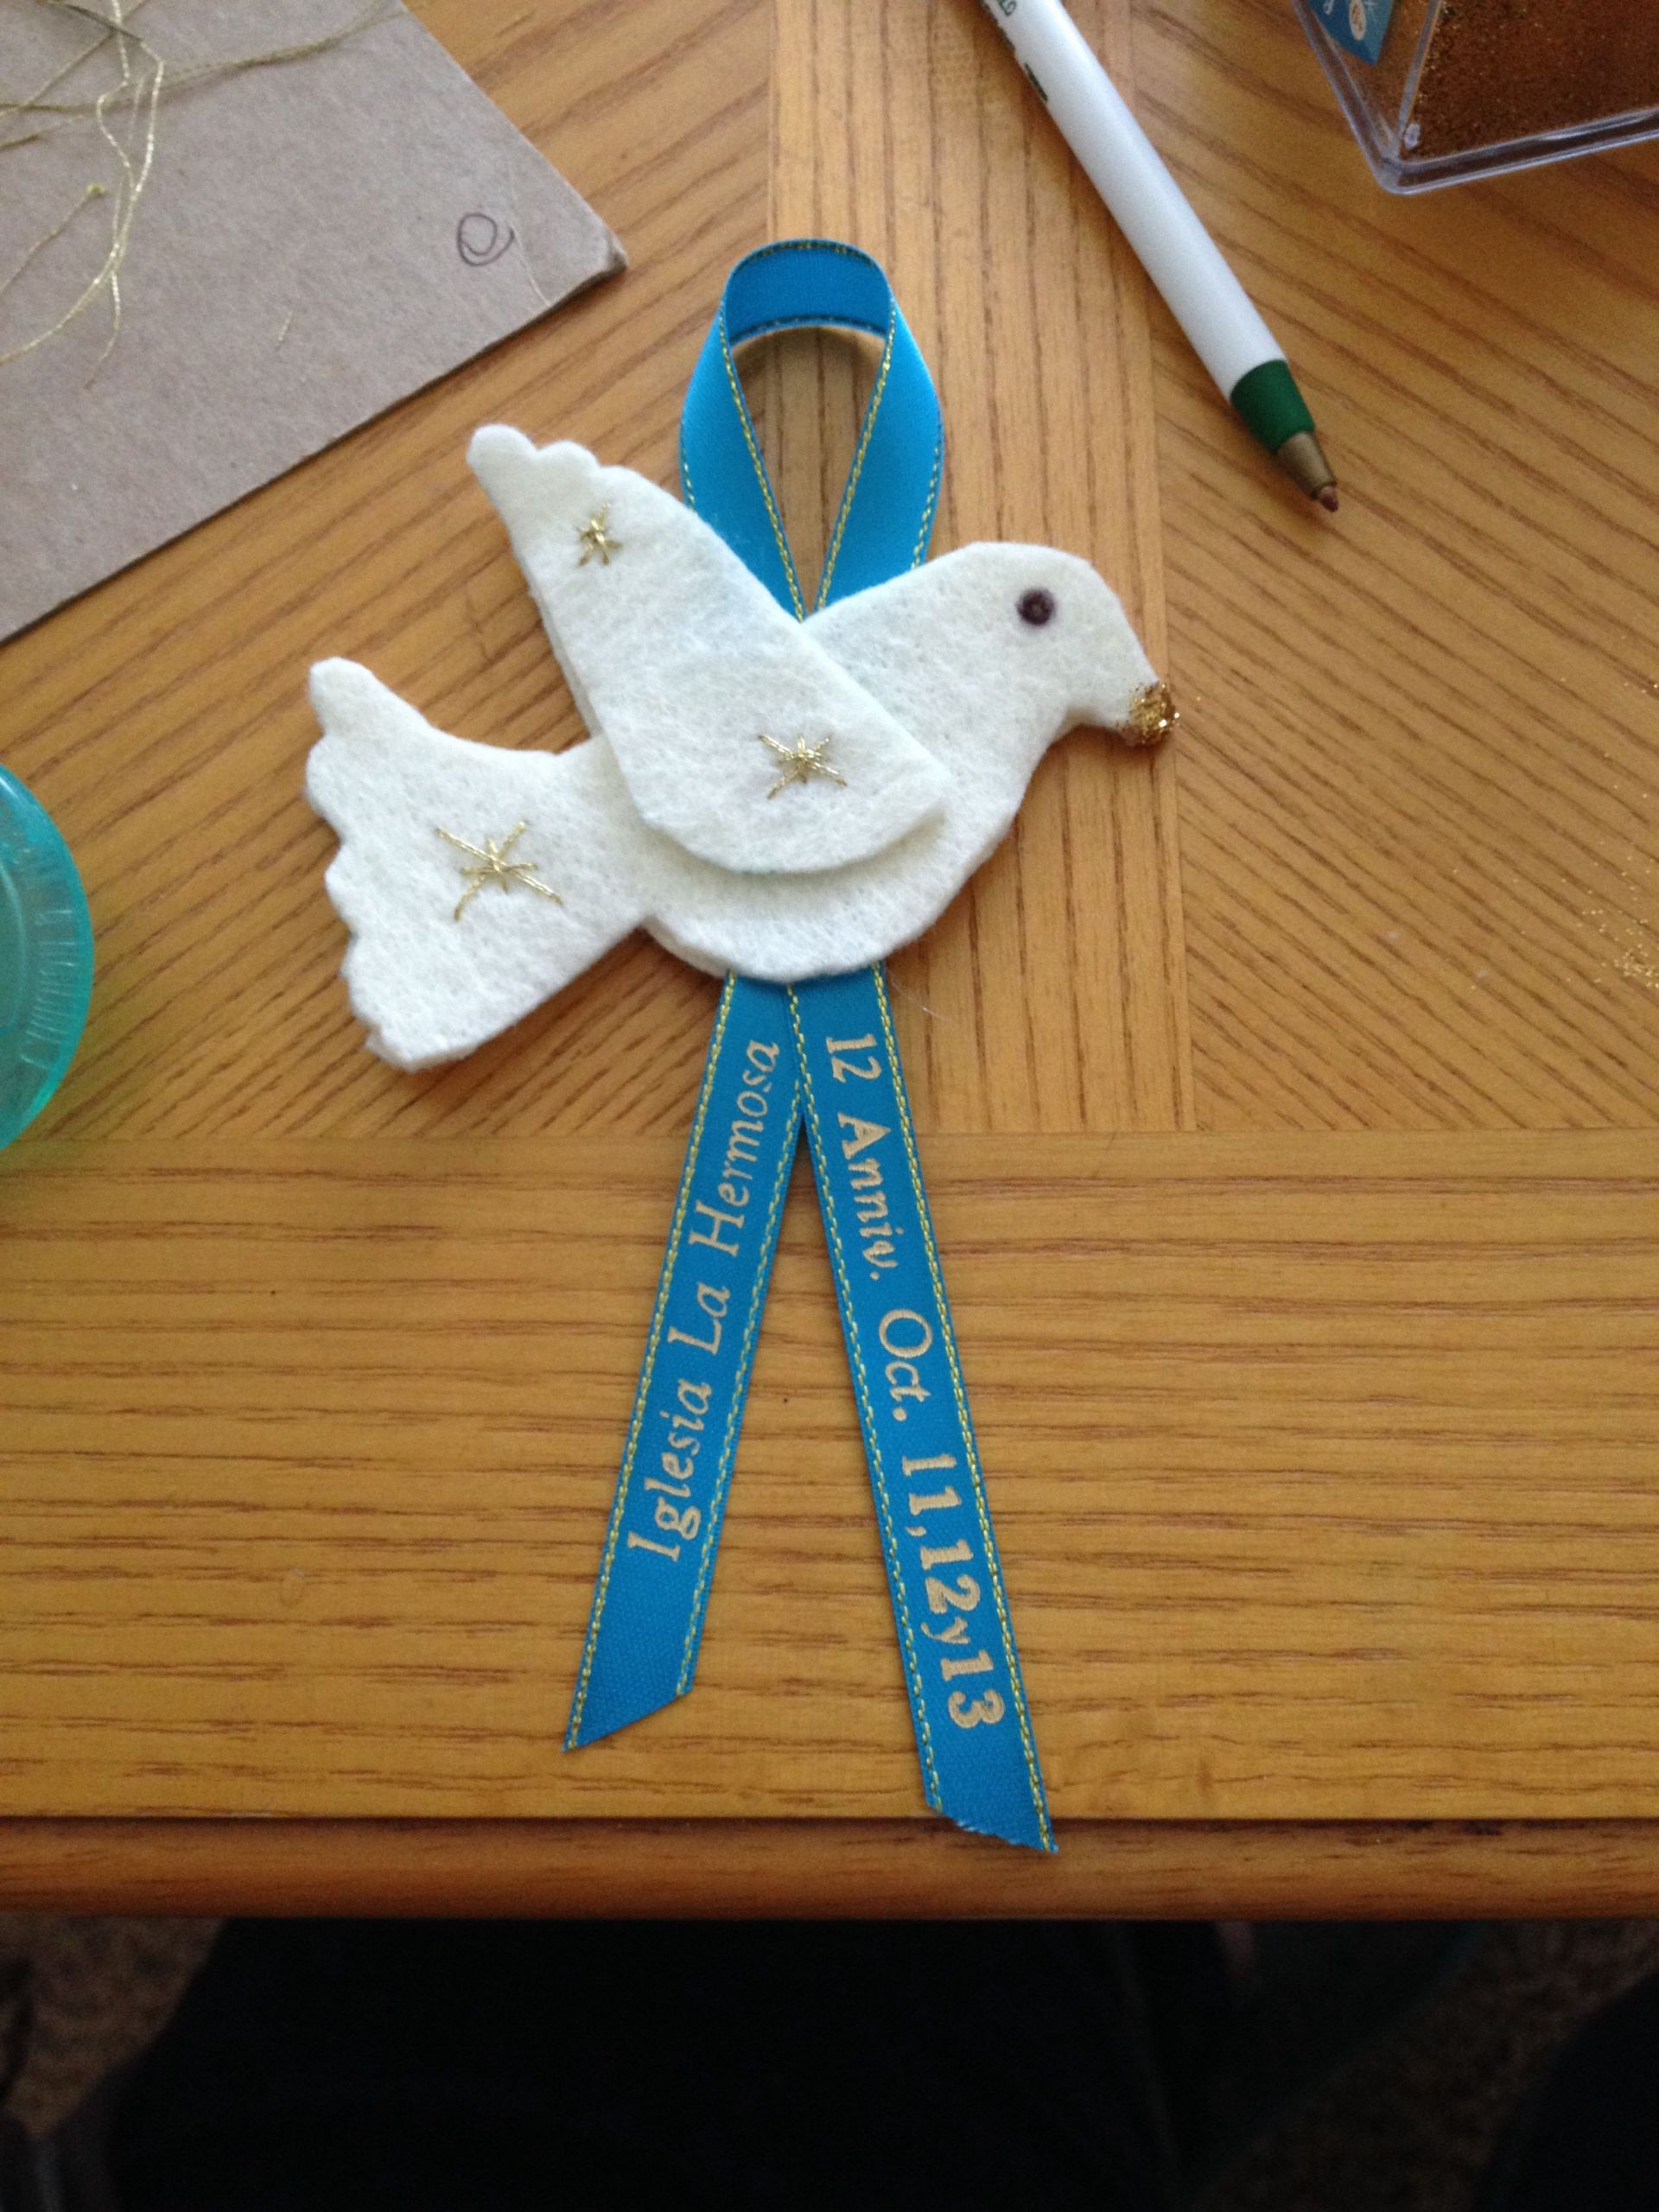 Gift Ideas For Church Anniversary
 Church anniversary favors dove turquoise printed ribbon